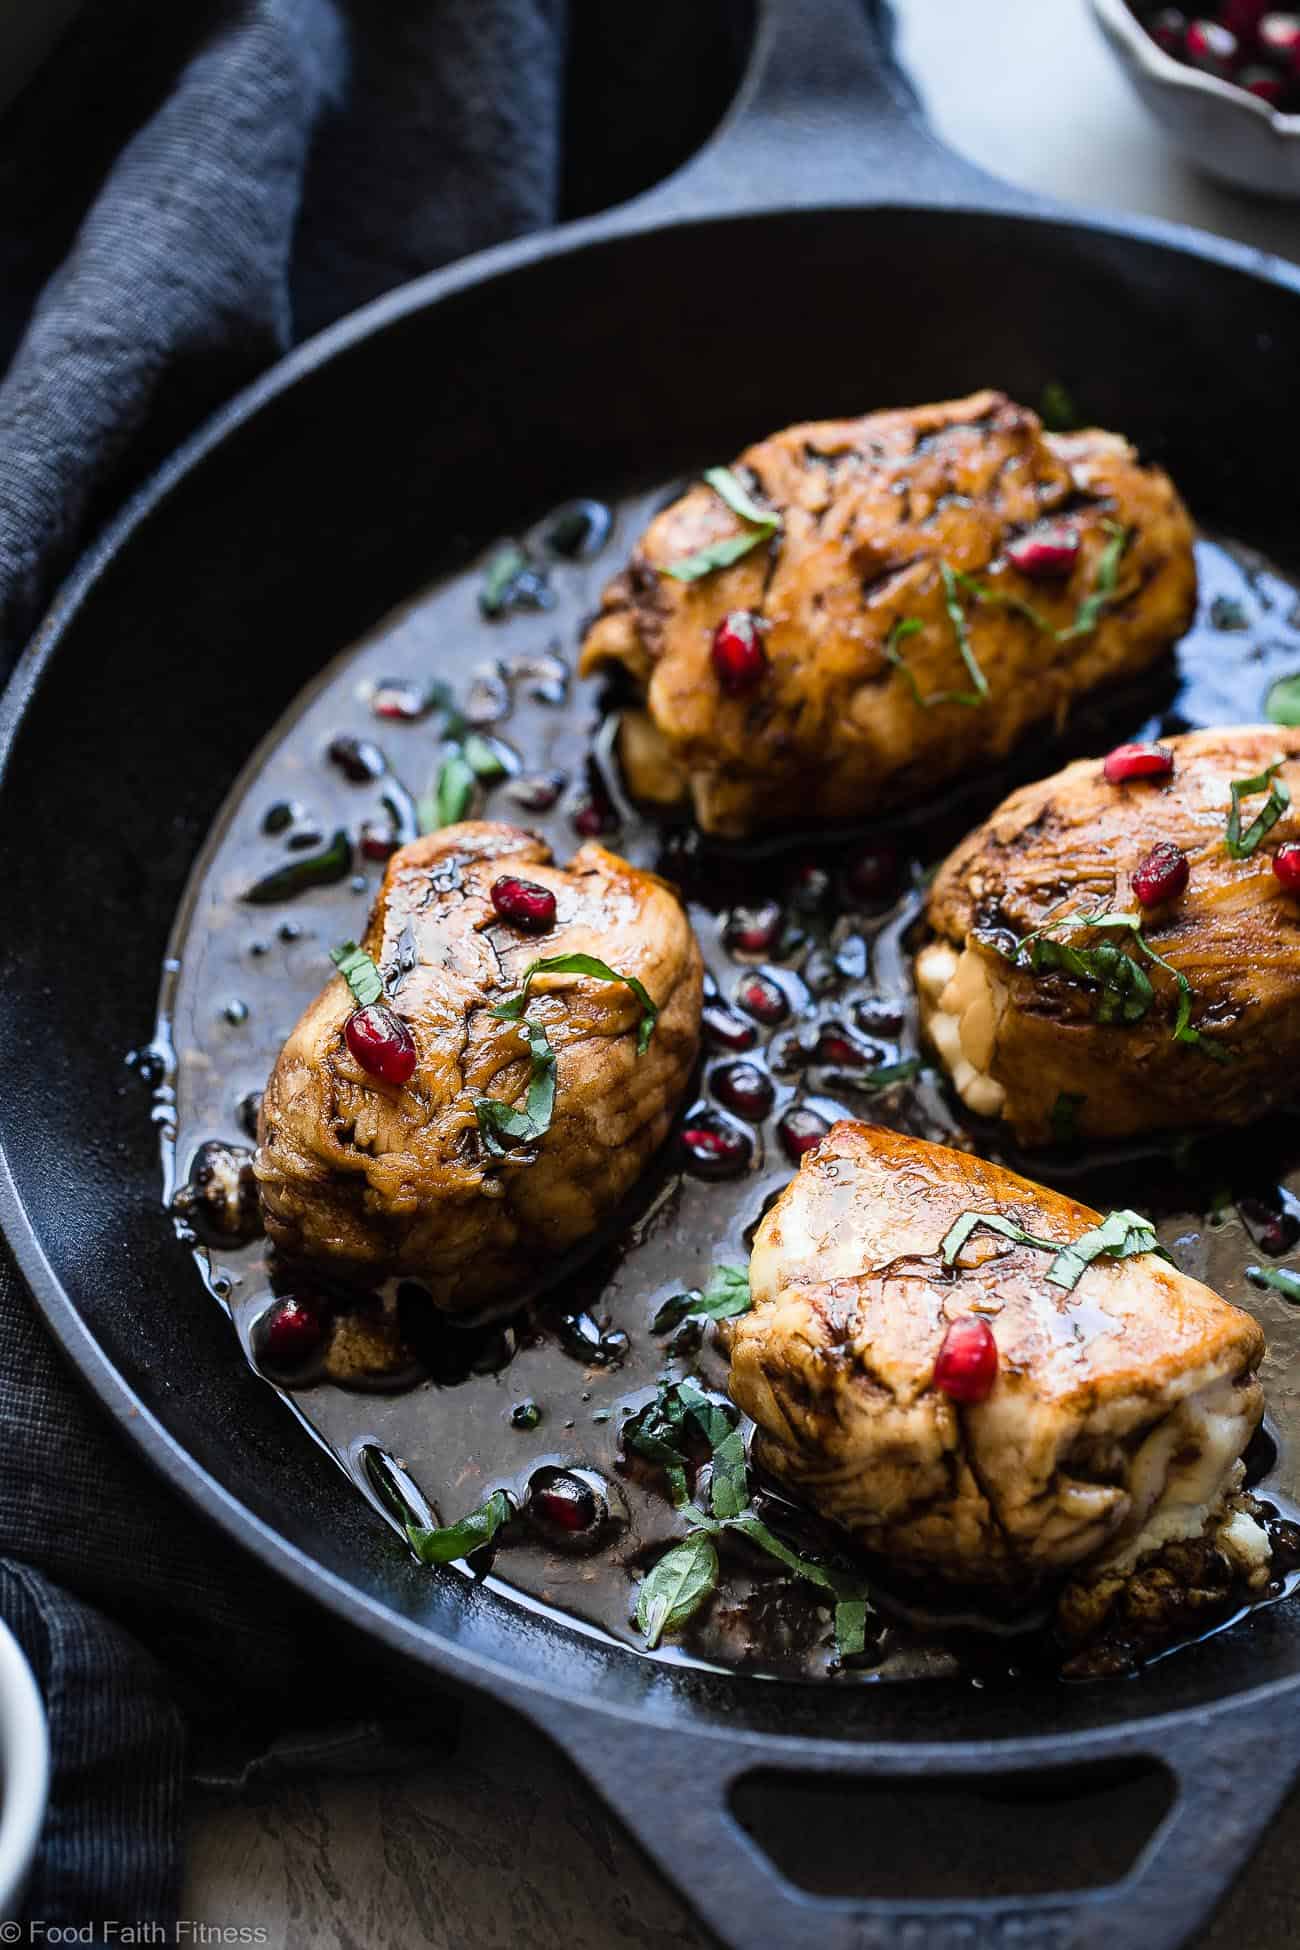 Baked Balsamic Goat Cheese Stuffed Pomegranate chicken | Food Faith Fitness